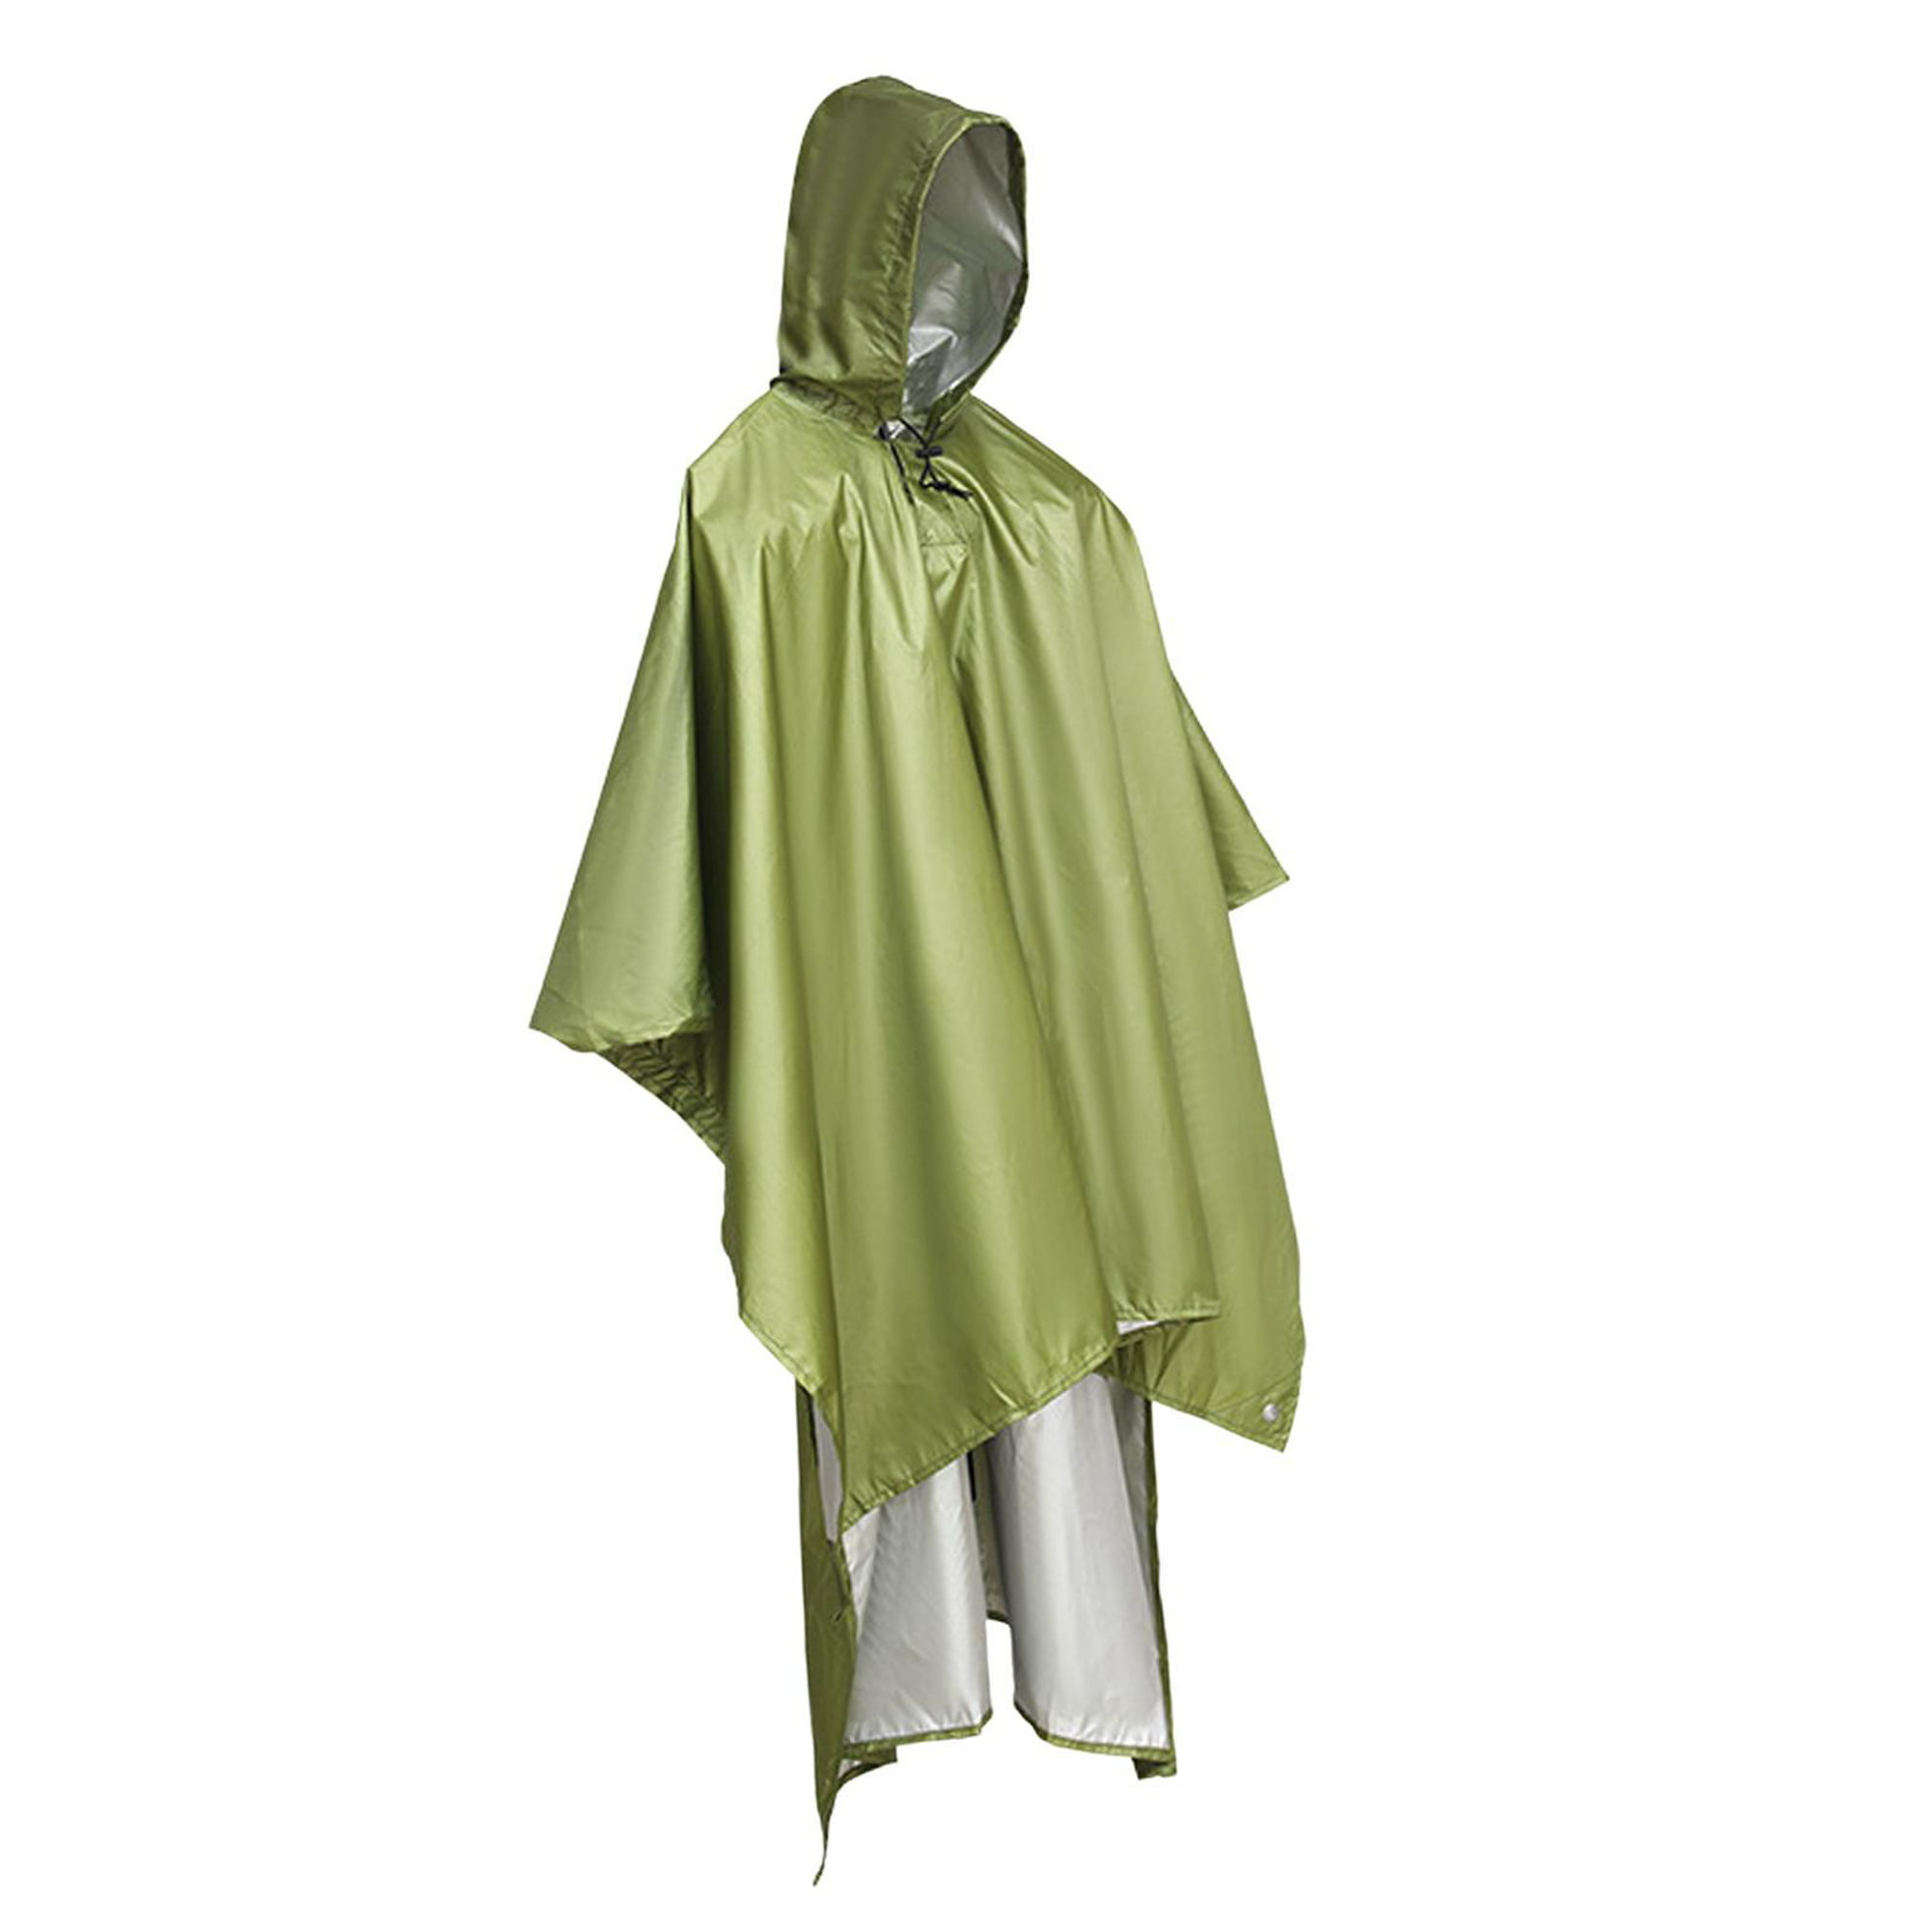 Runup Poncho Impermeable para Hombre Mujer, Poncho Lluvia Verde